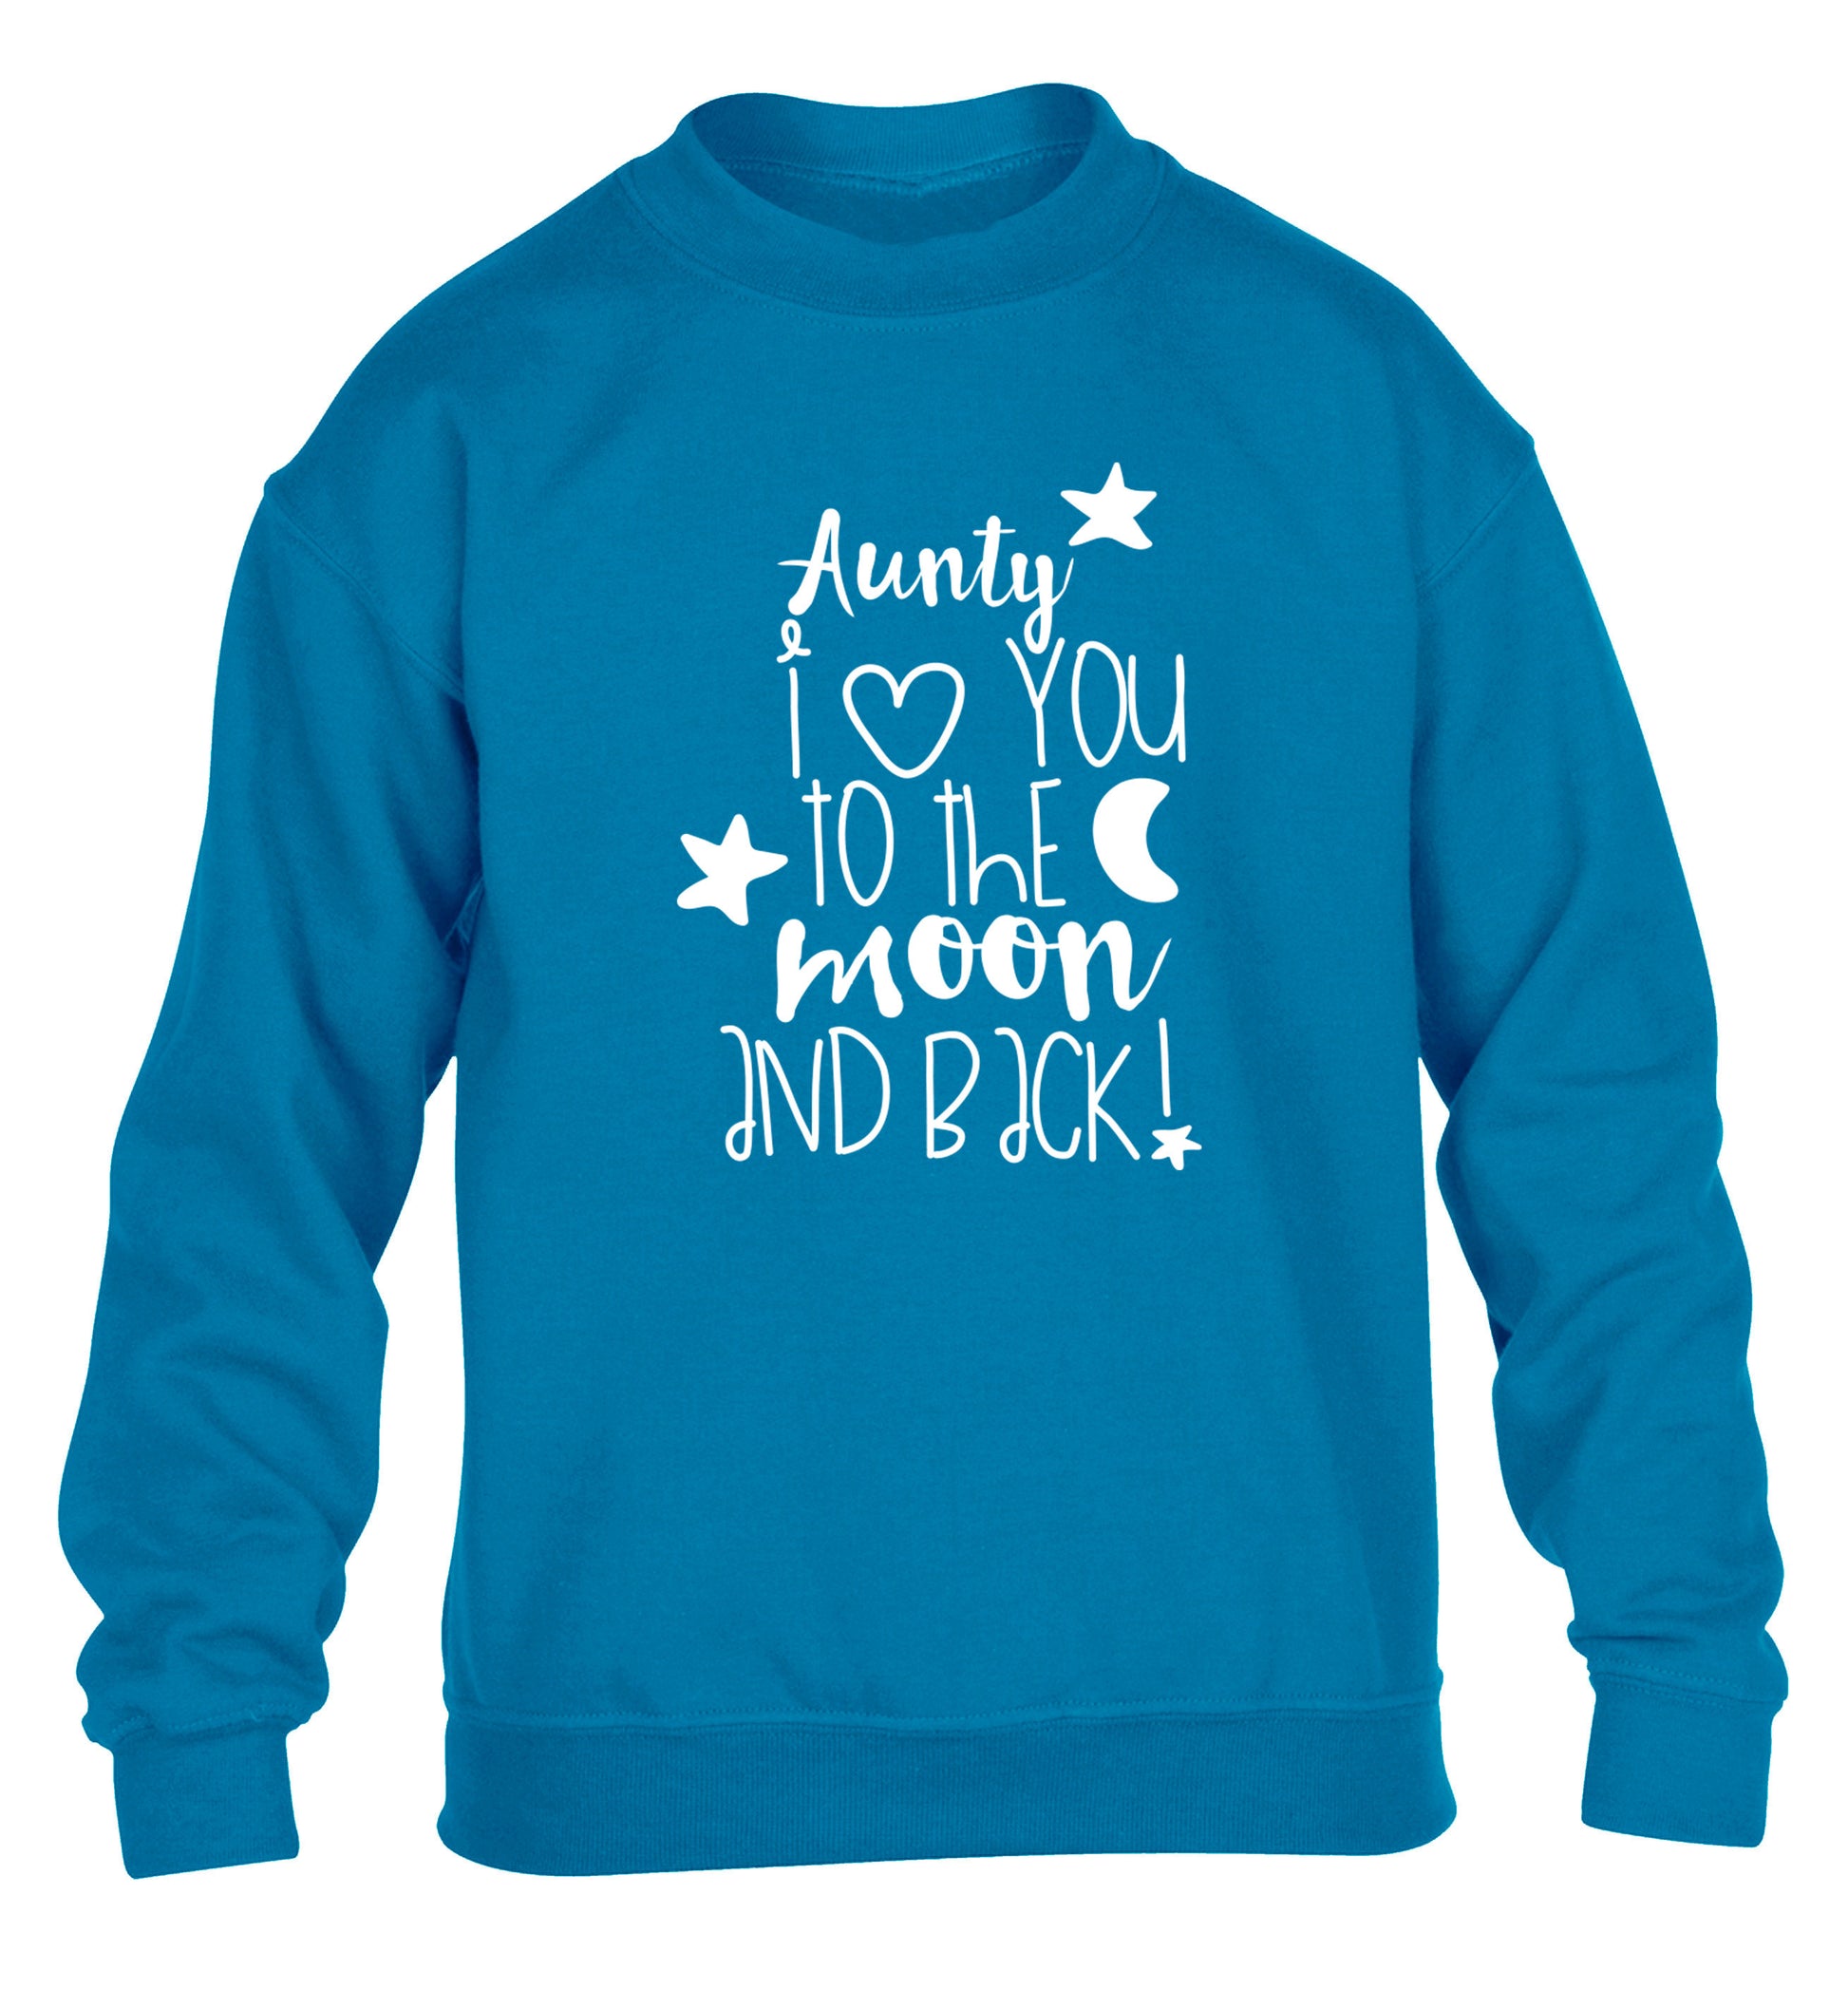 Aunty I love you to the moon and back children's blue  sweater 12-14 Years